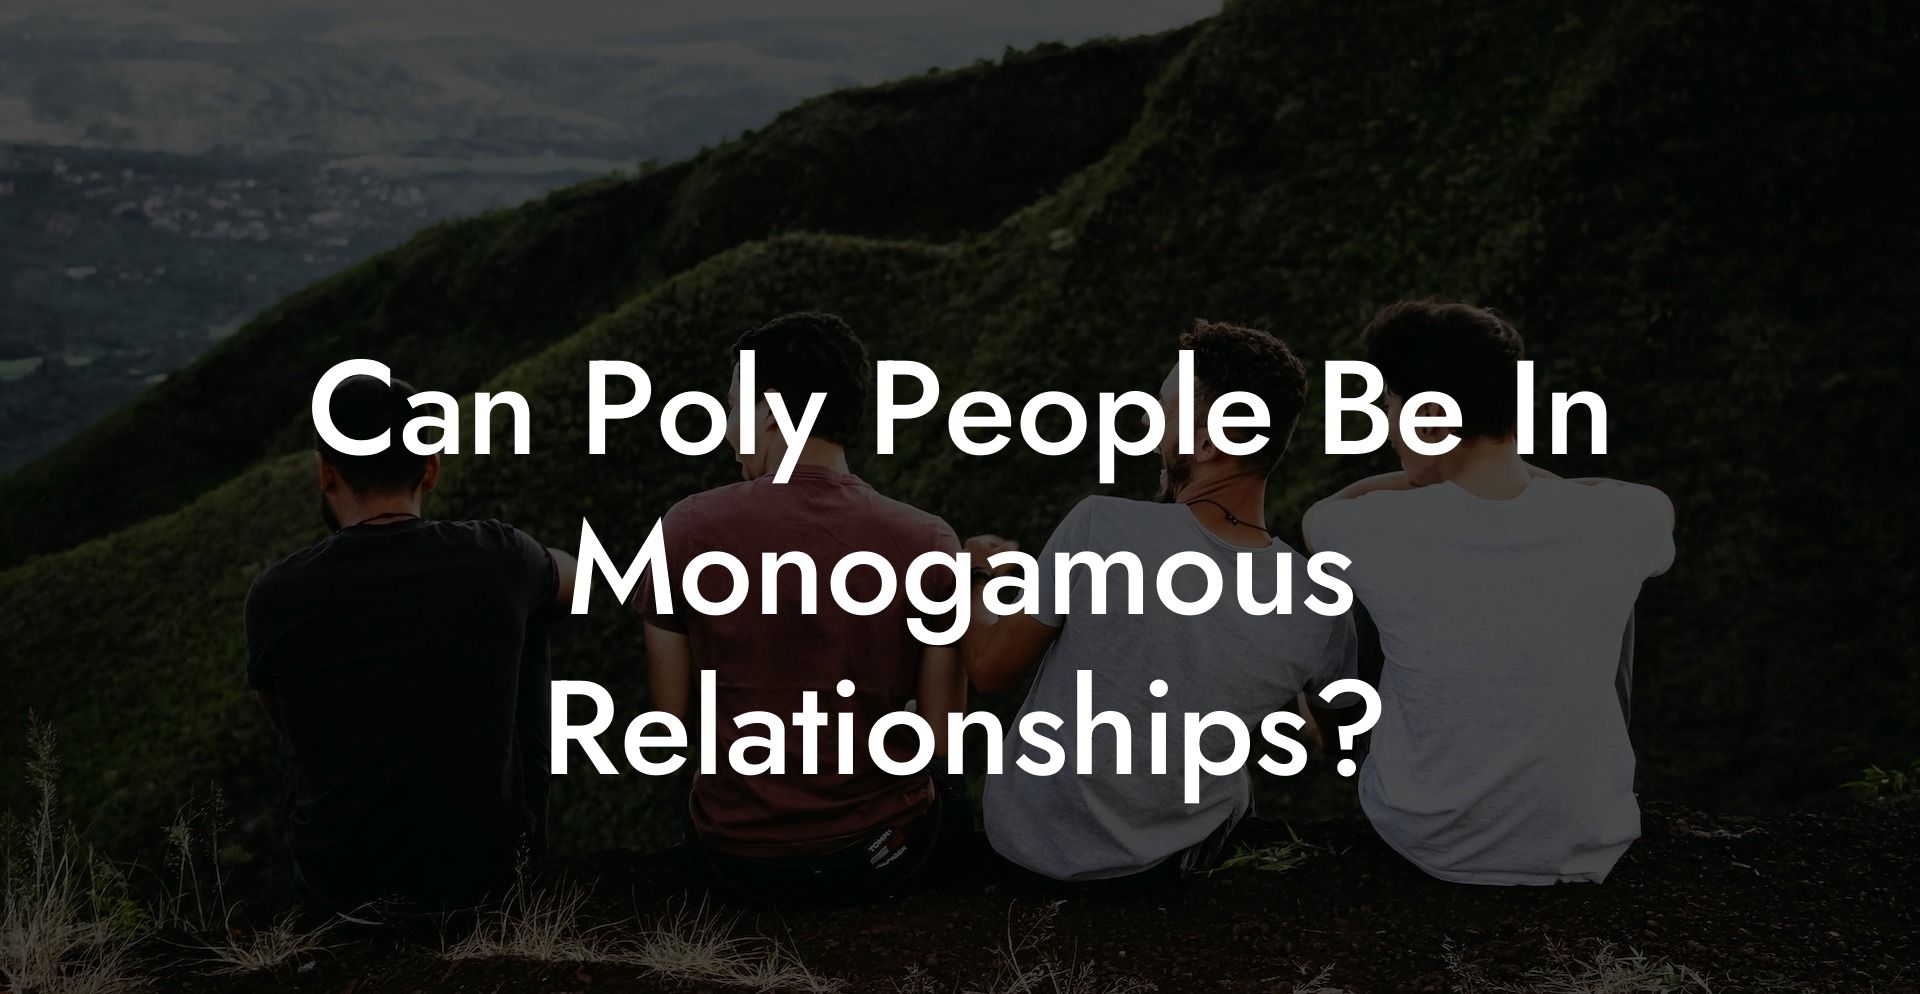 Can Poly People Be In Monogamous Relationships?